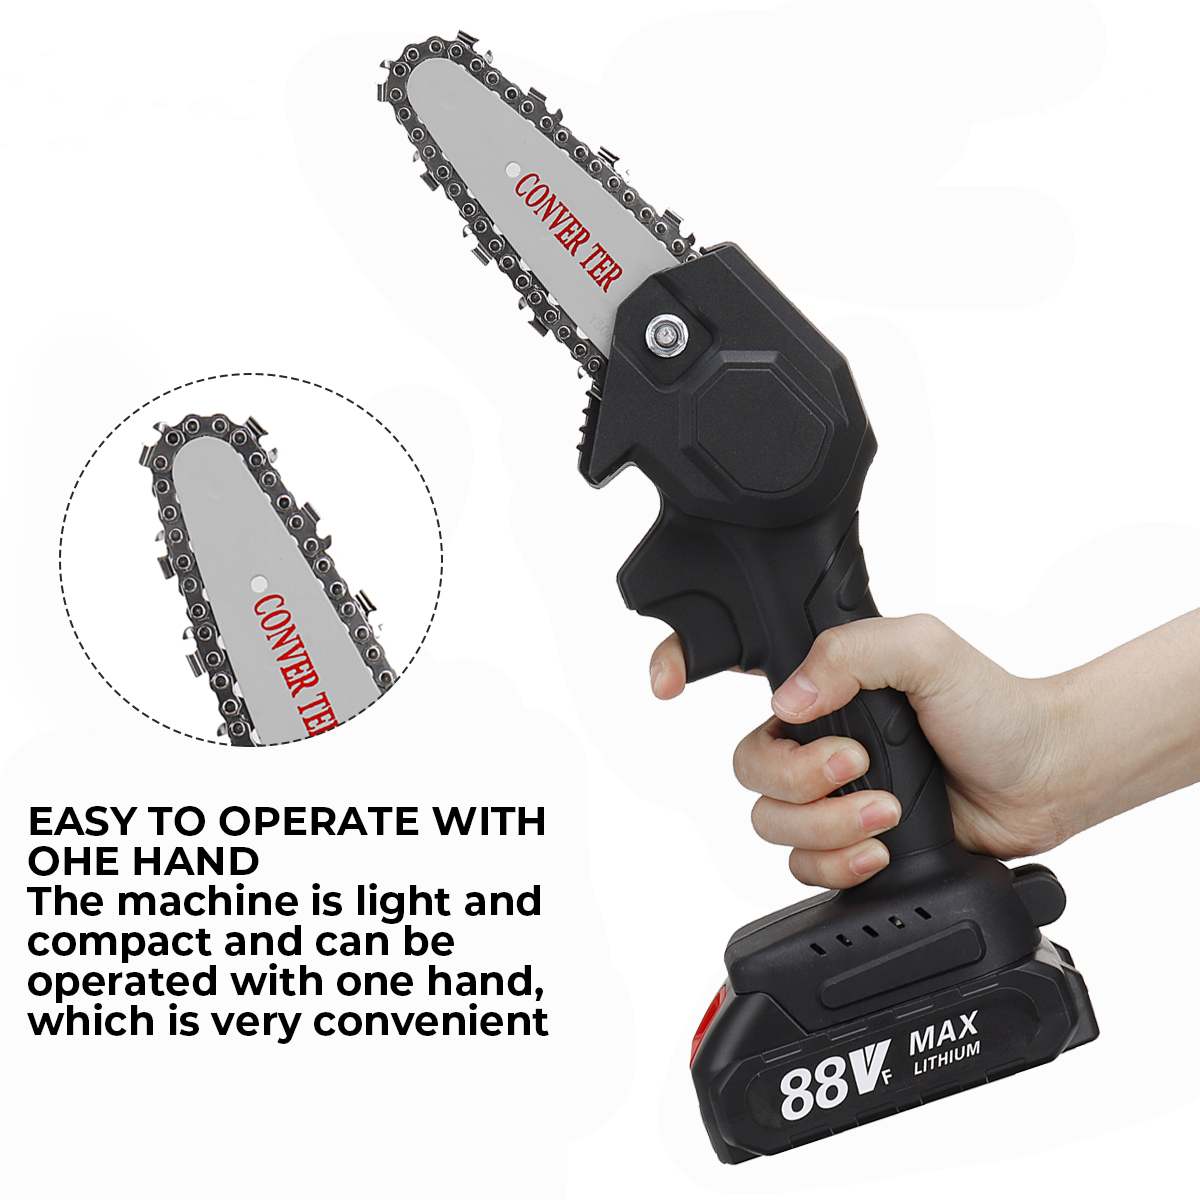 4-Inch-15000mAh-Mini-Electric-Chain-Saw-Pruning-Chainsaw-Cordless-Garden-Tree-Logging-Trimming-Saw-F-1799643-2